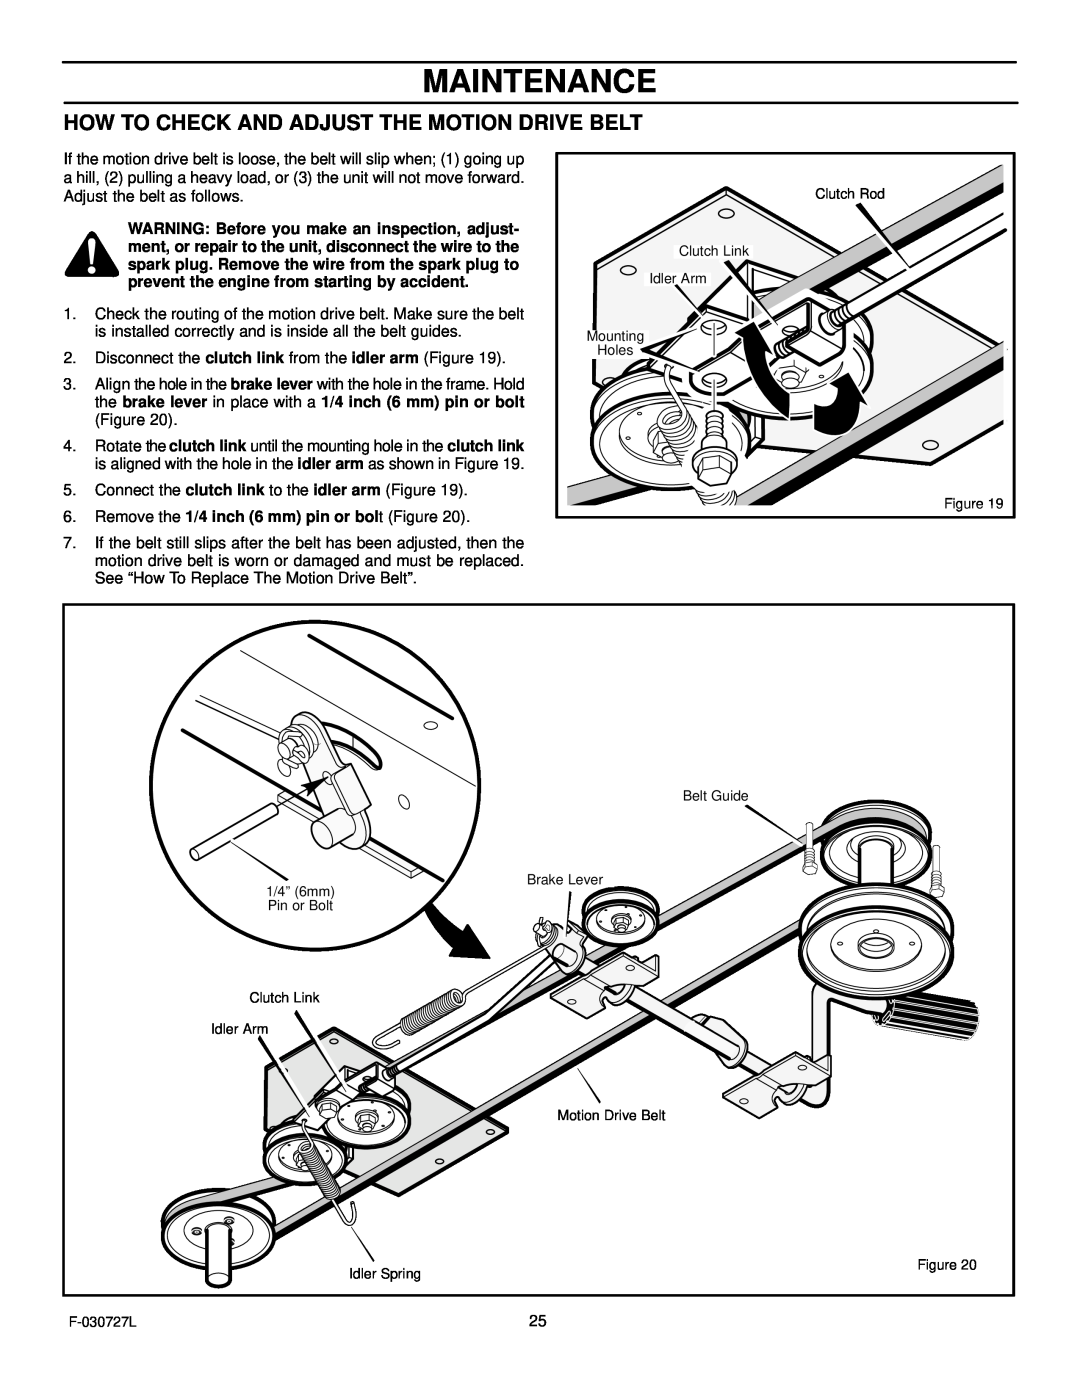 Murray 465600x8A manual Maintenance, How To Check And Adjust The Motion Drive Belt 